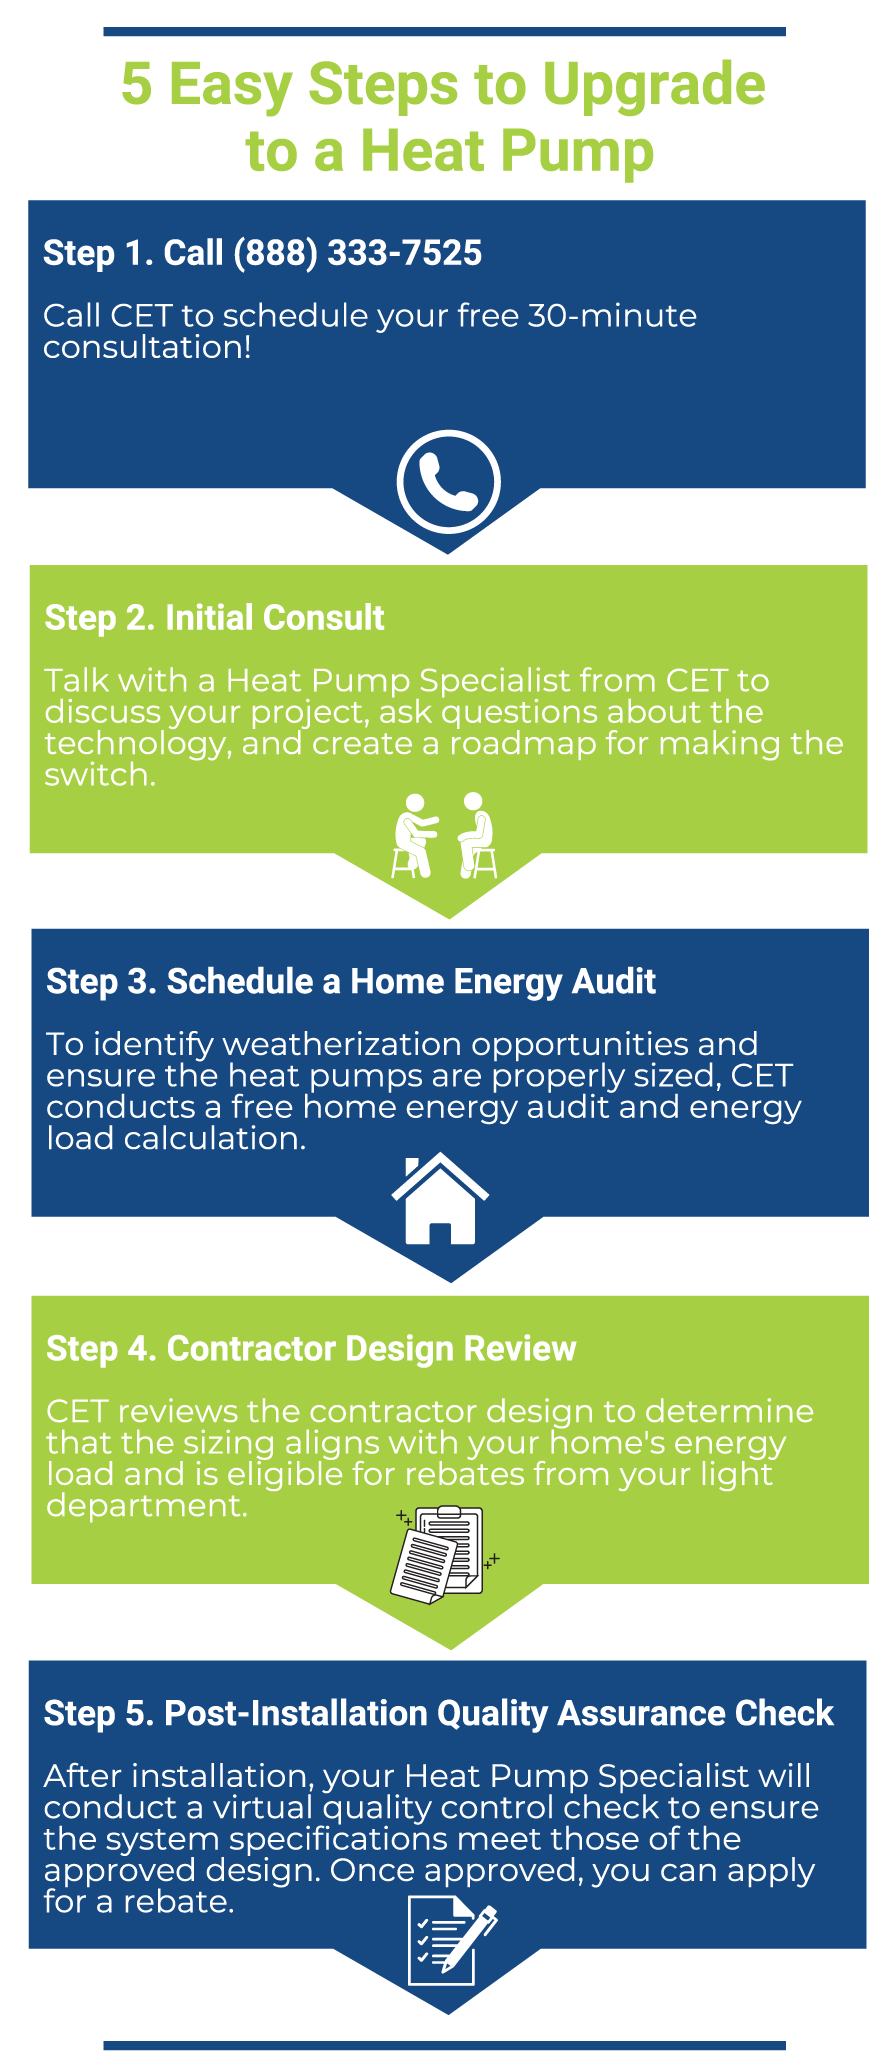 Air Source Heat Pump 5 Easy Steps to Upgrade chart